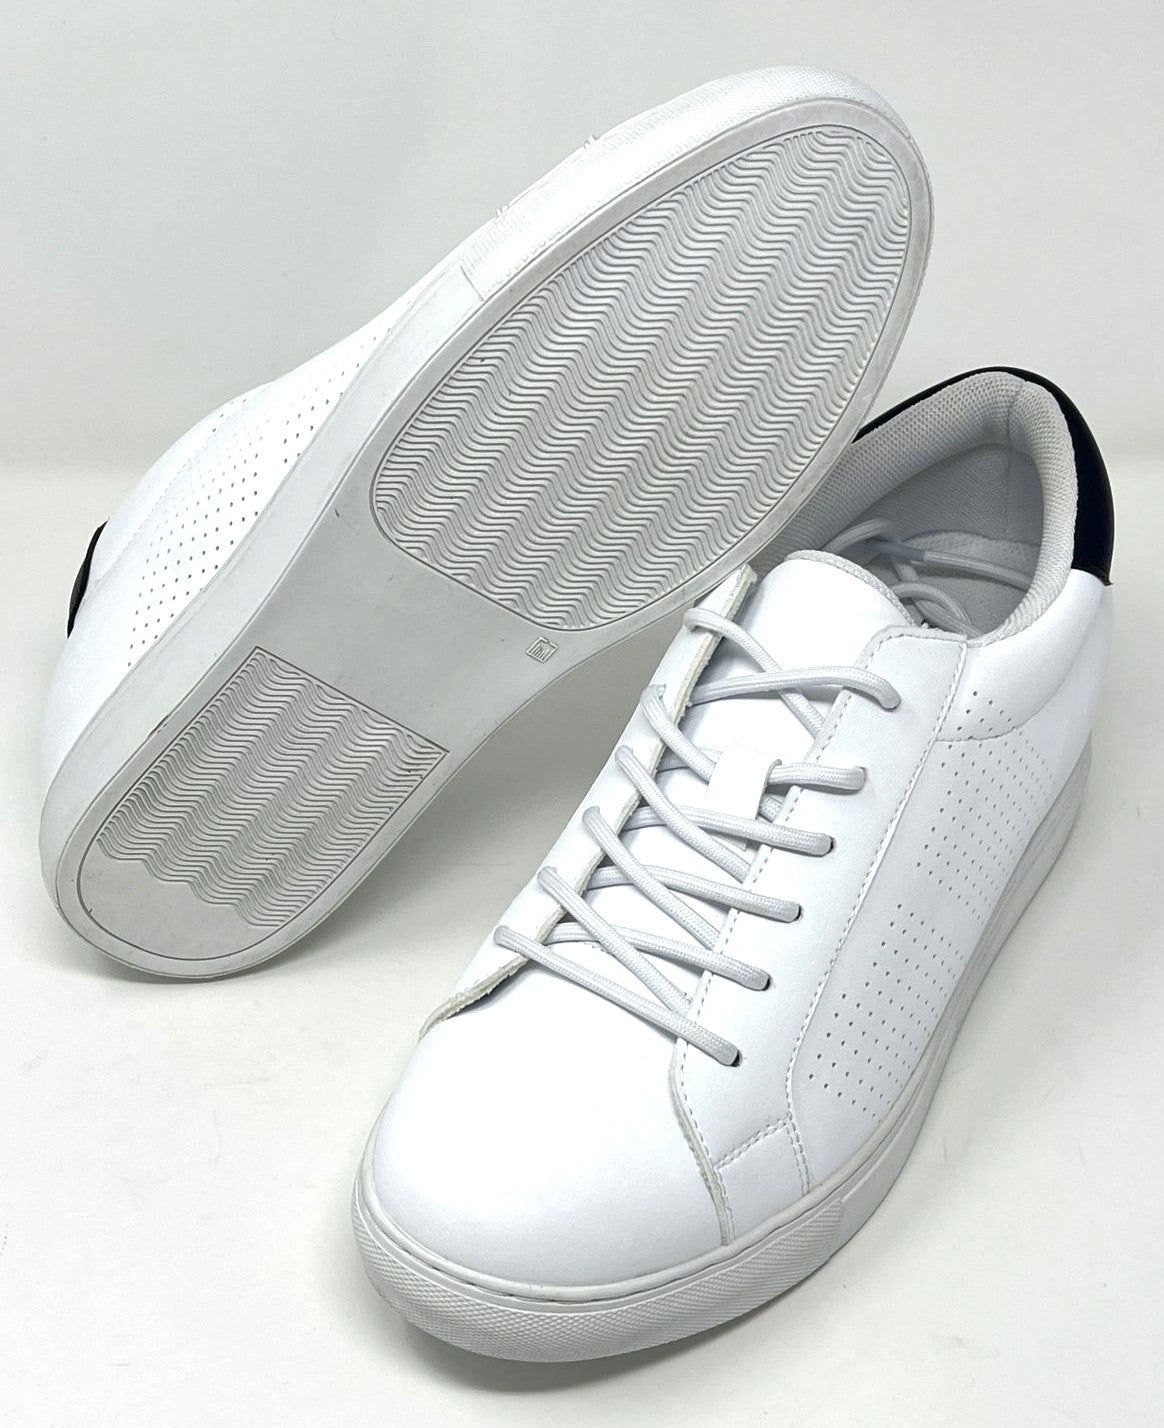 FSC0106 - 2.8 Inches Taller (White) - Size 9 Only